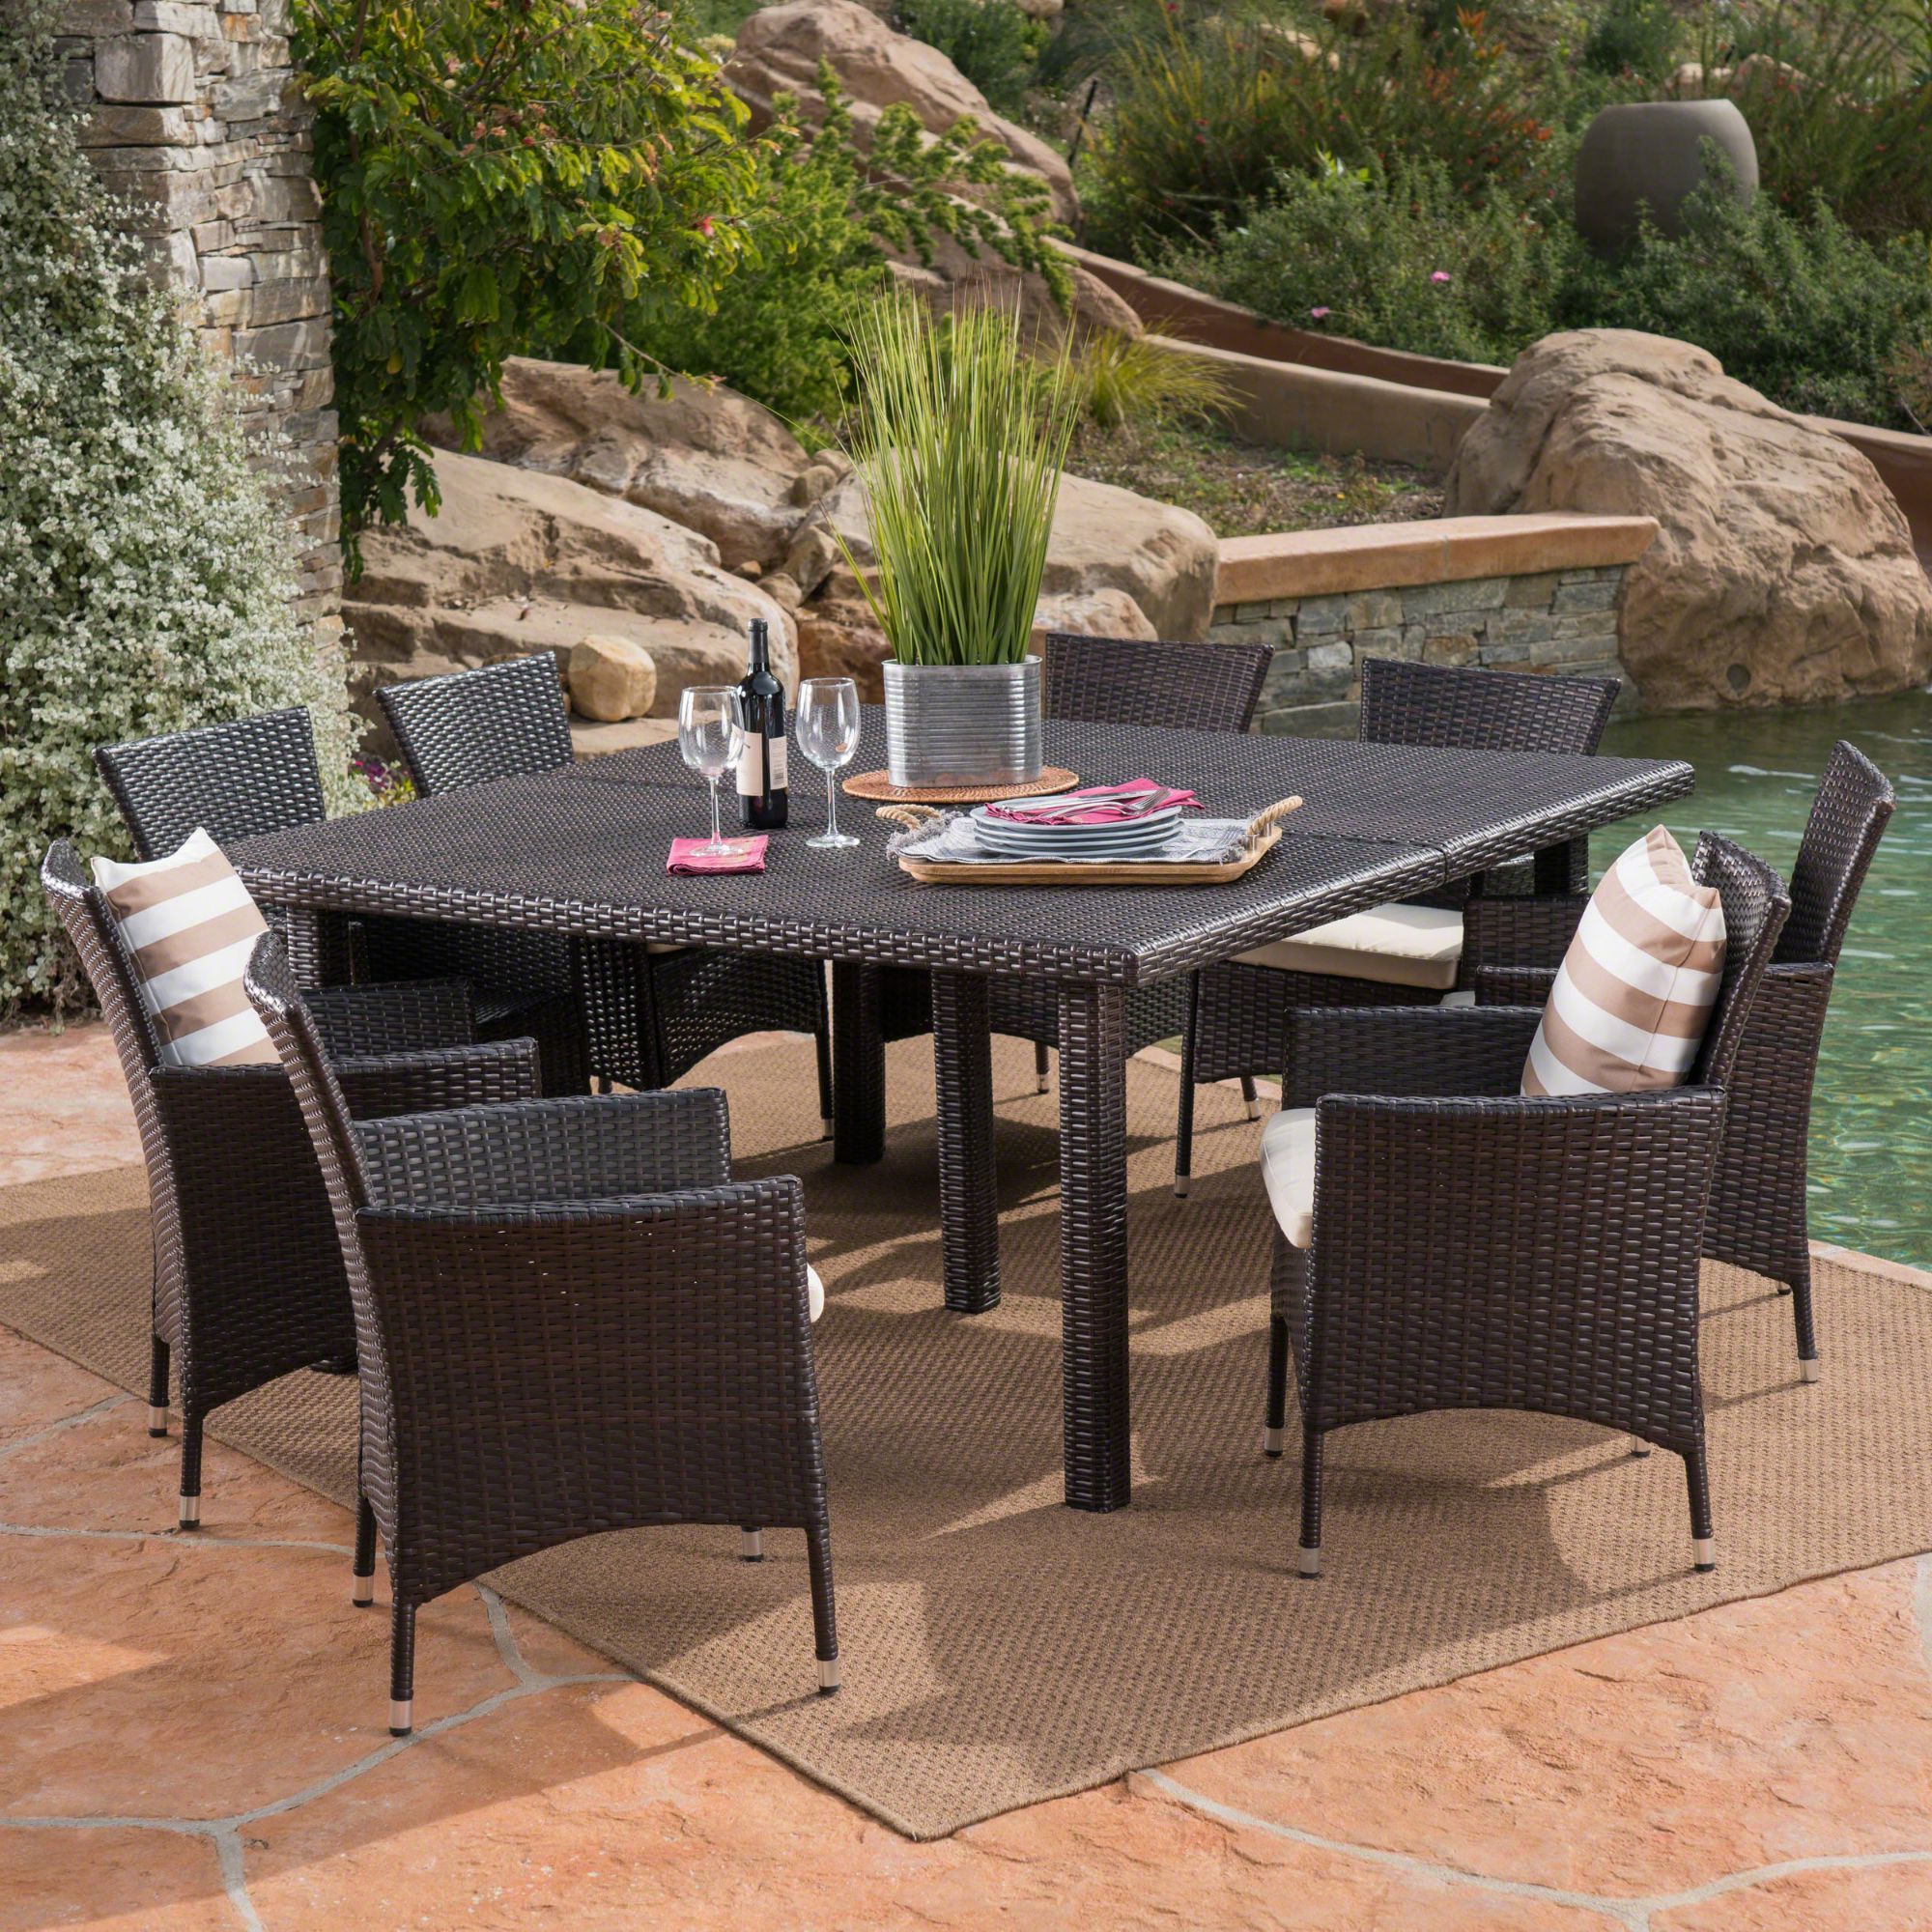 Current 9 Piece Square Patio Dining Sets Regarding 9 Piece Brown Finish Square Wicker Outdoor Furniture Patio Dining Set (View 1 of 15)